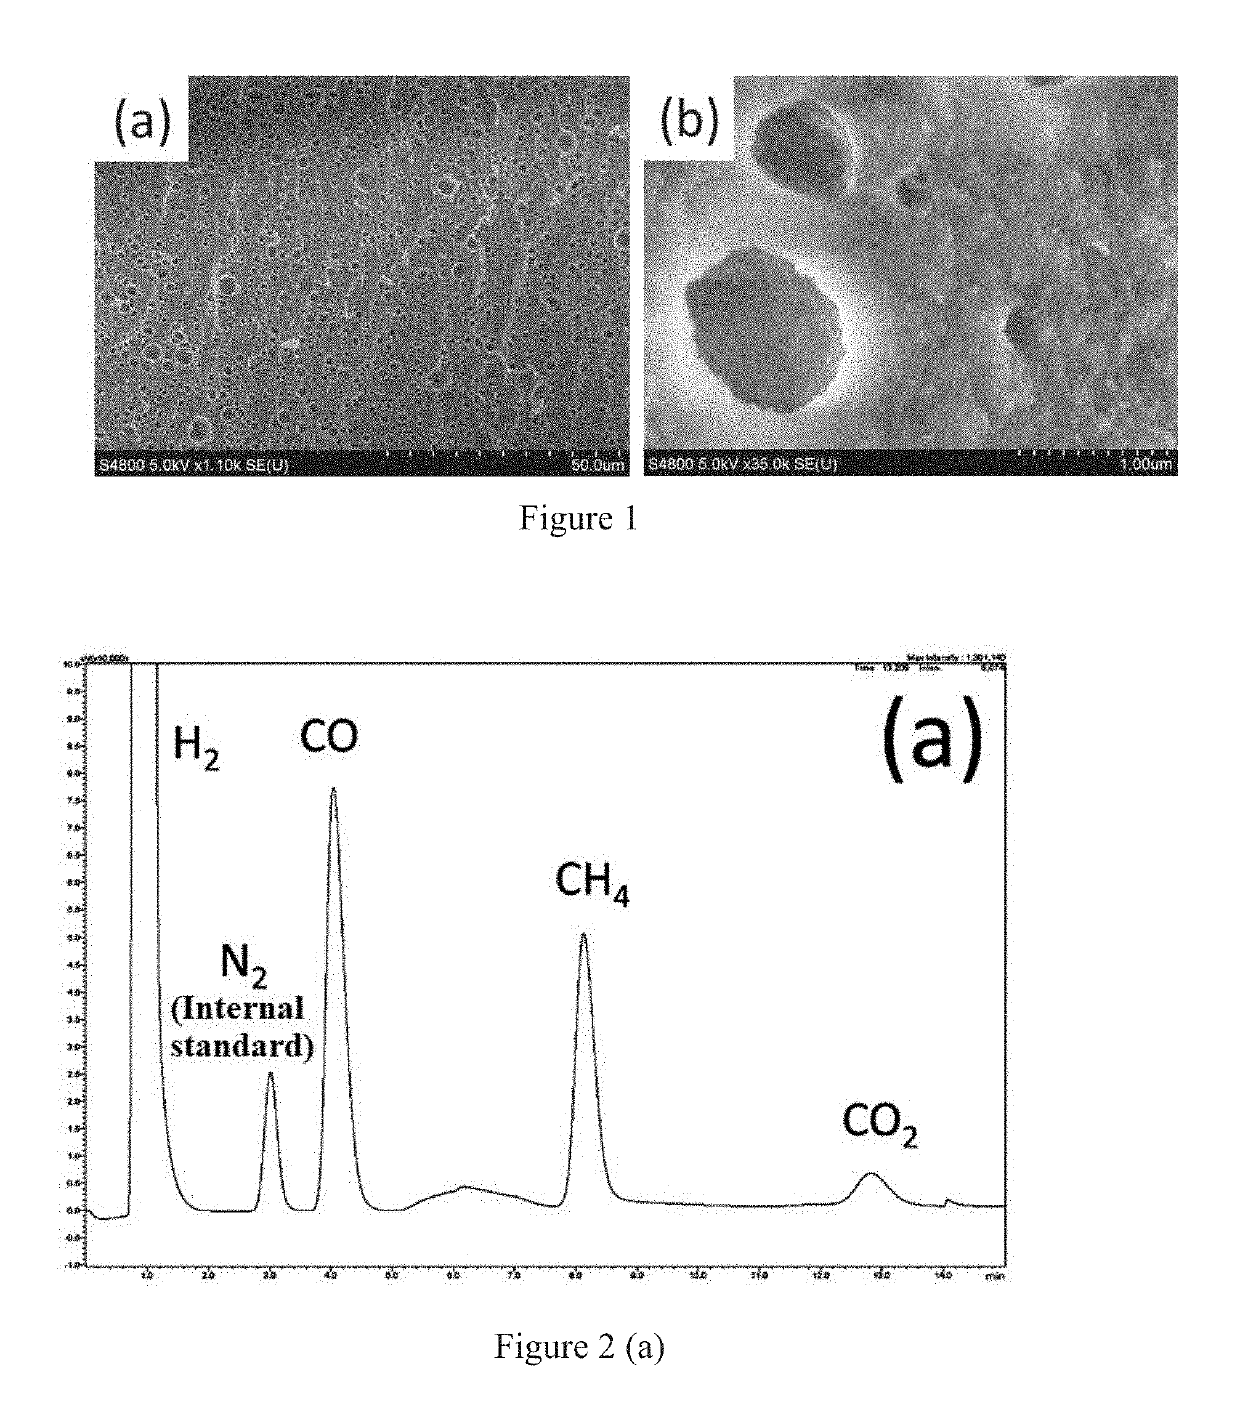 Nanocatalysts, preparation methods and applications for reforming carbon dioxide and methane to syngas